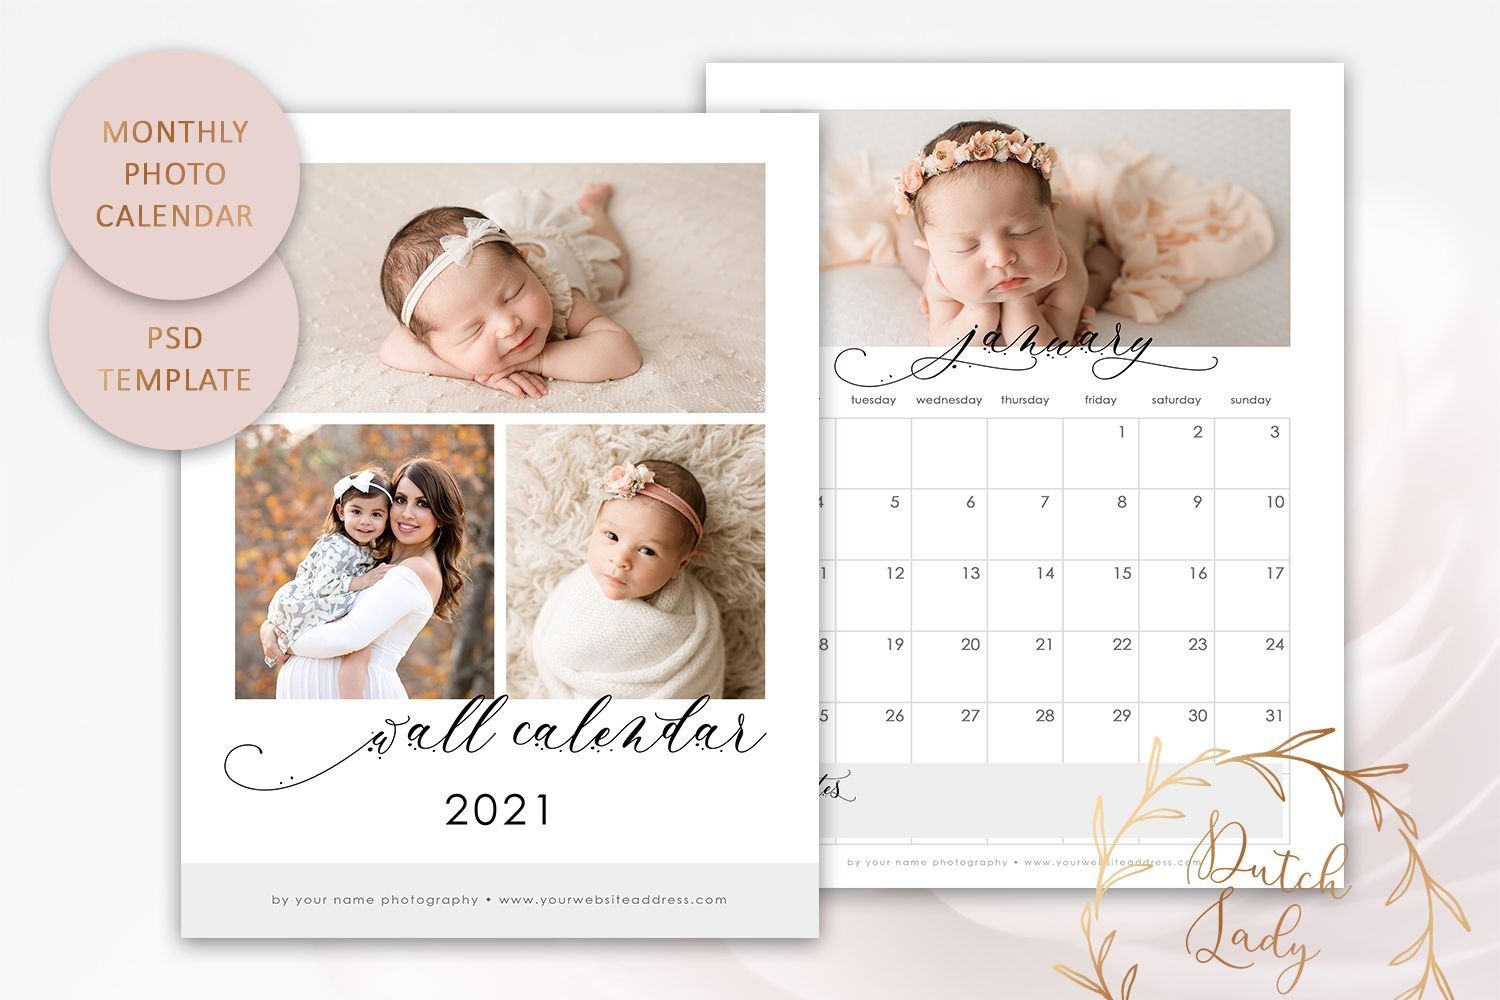 Psd Photo Calendar Template 2021 #1 (Graphic) By